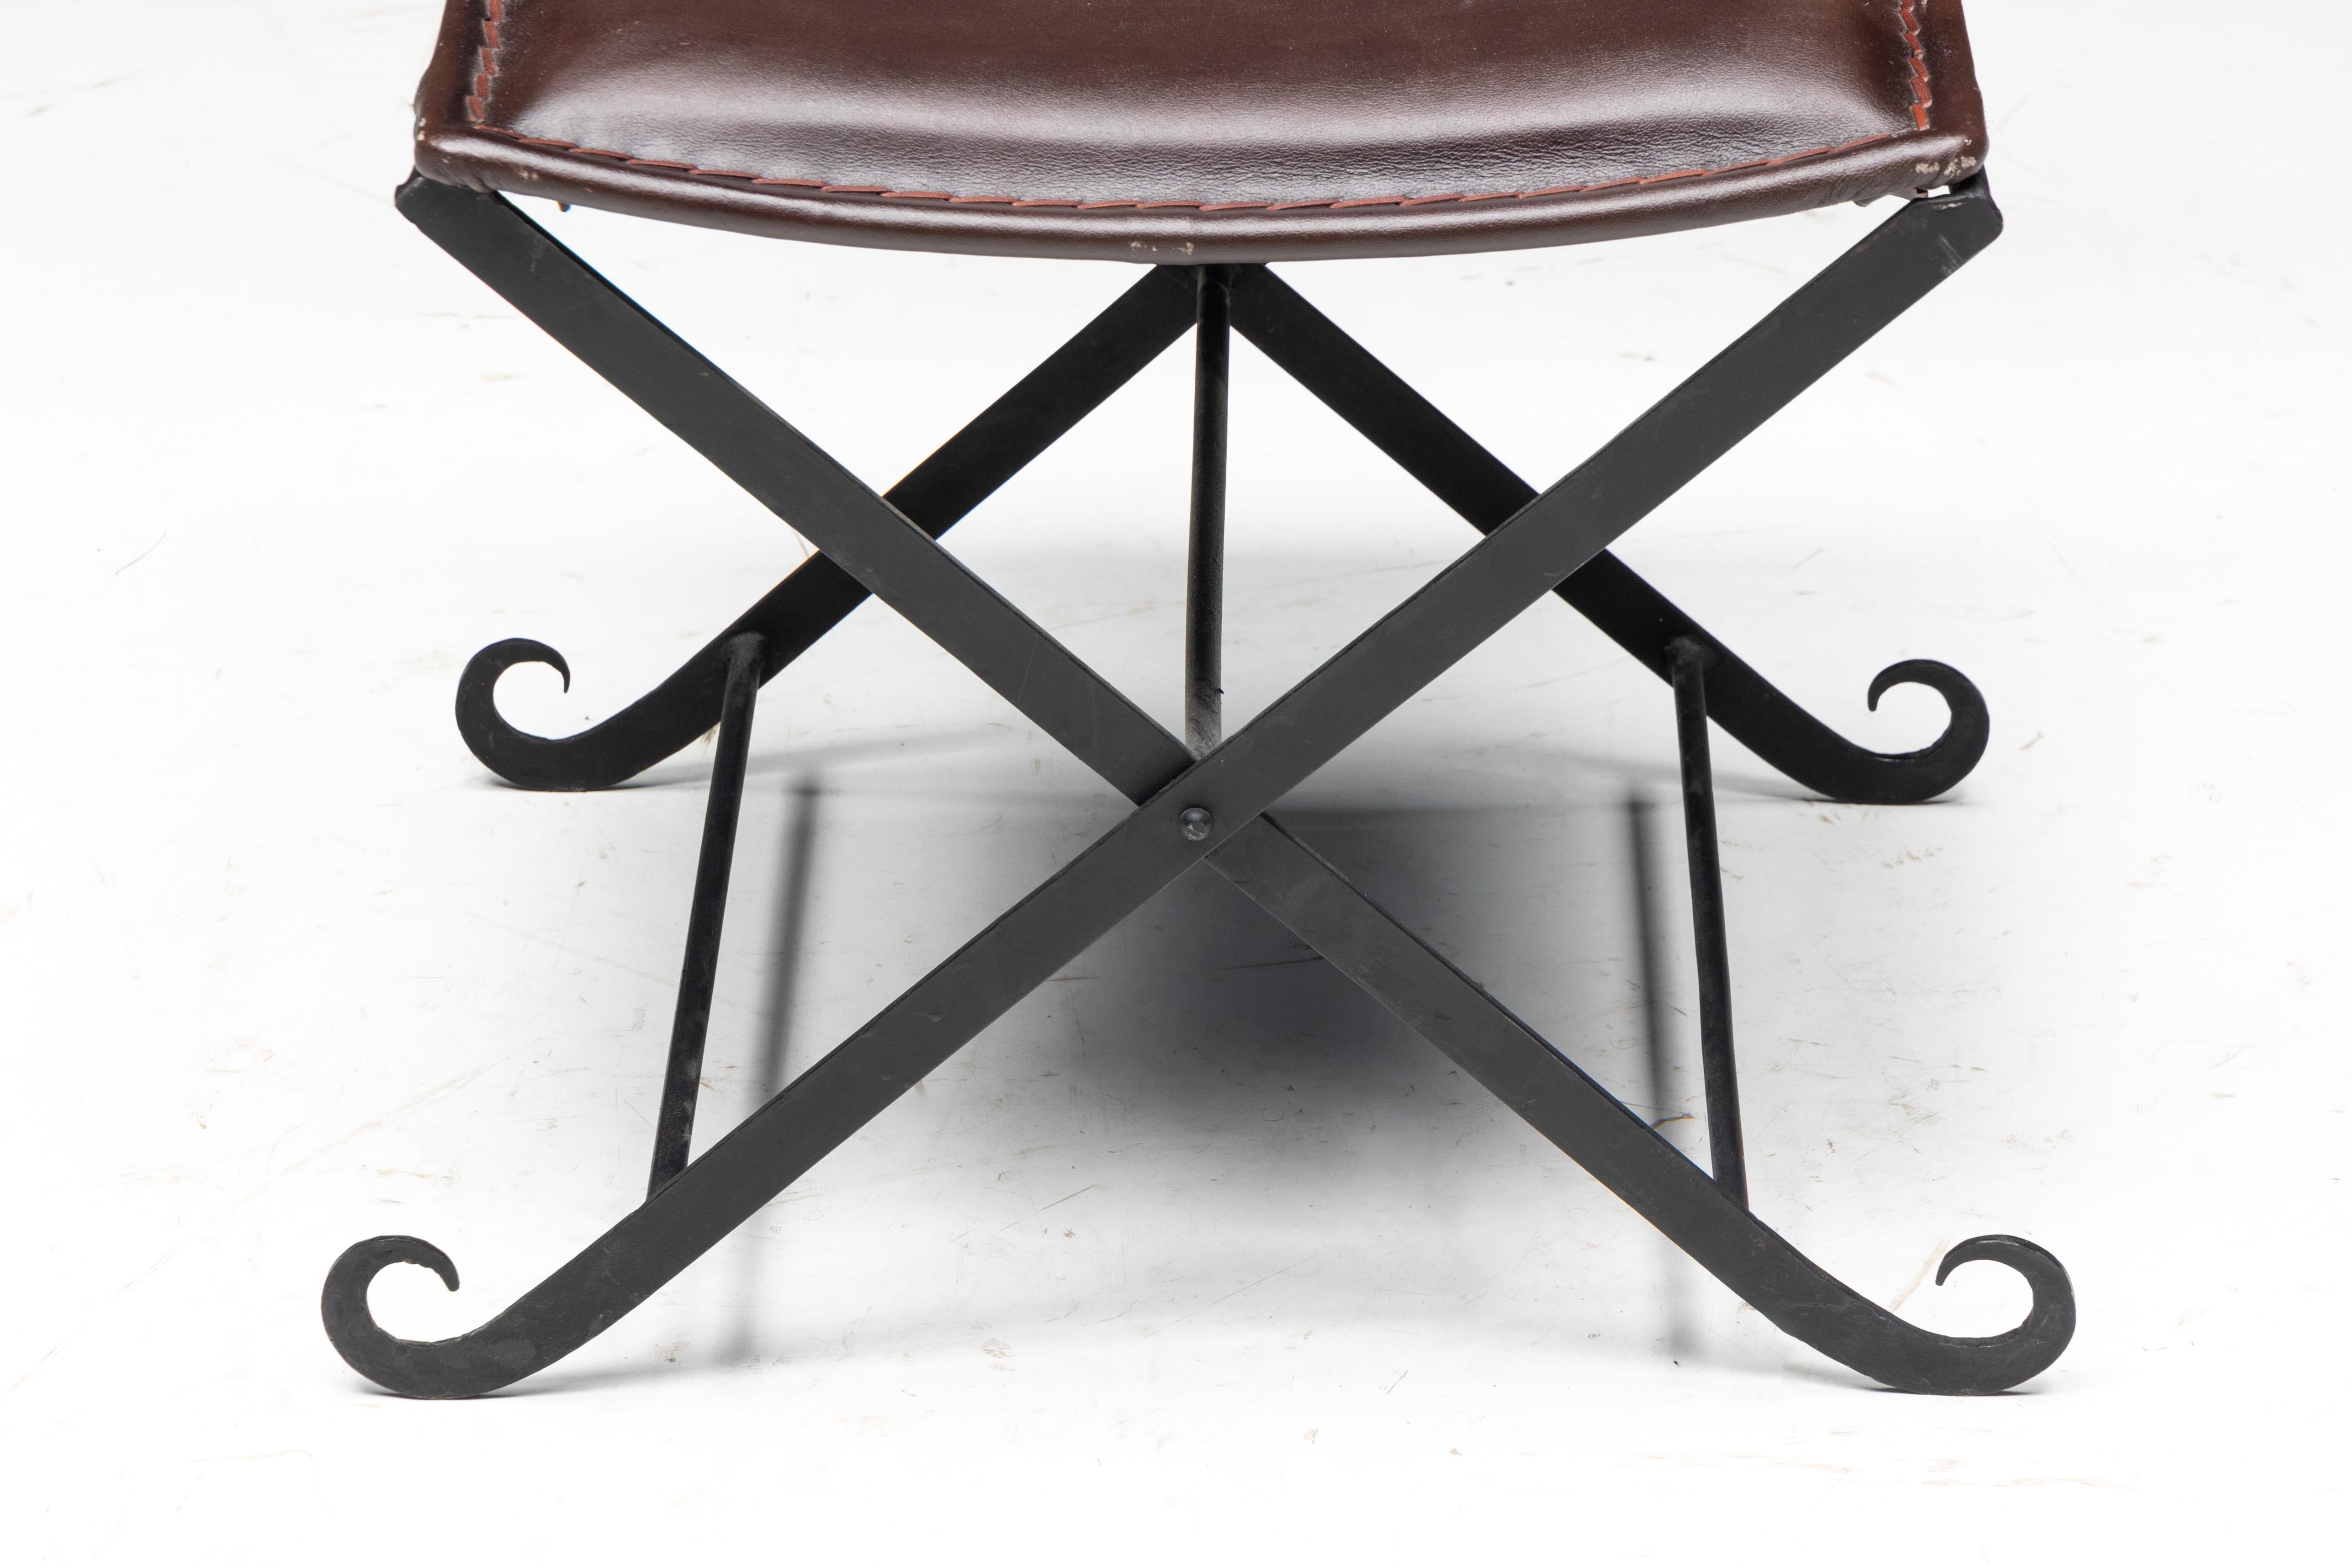 Rustic Iron and Leather Dining Chairs, France, 1940s For Sale 8